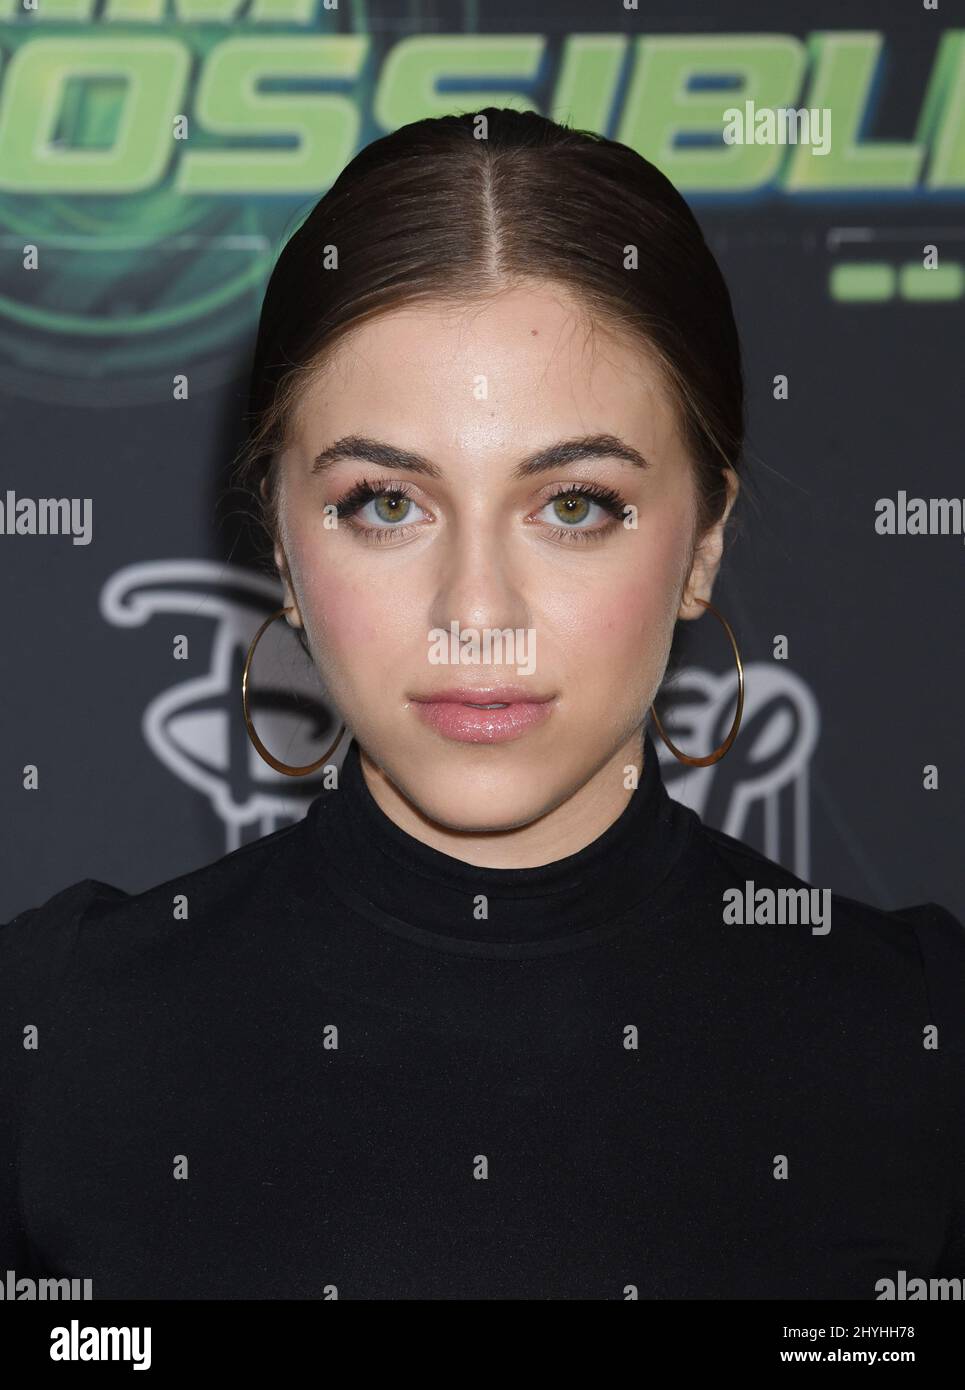 Baby Ariel at Disney Channel's 'Kim Possible' Premiere held at the Television Academy Stock Photo